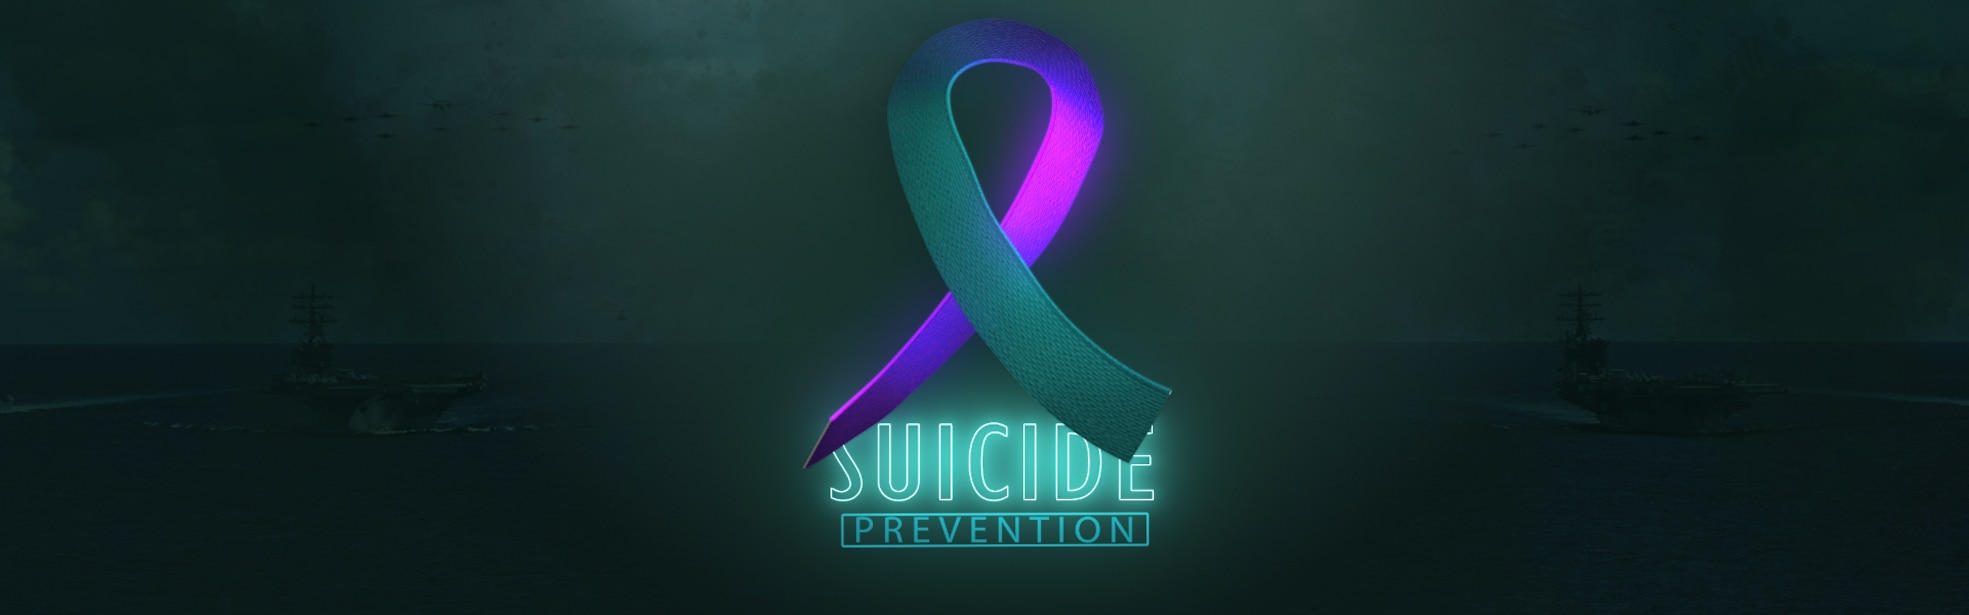 Teal and purple 3-D ribbon superimposed over the words 